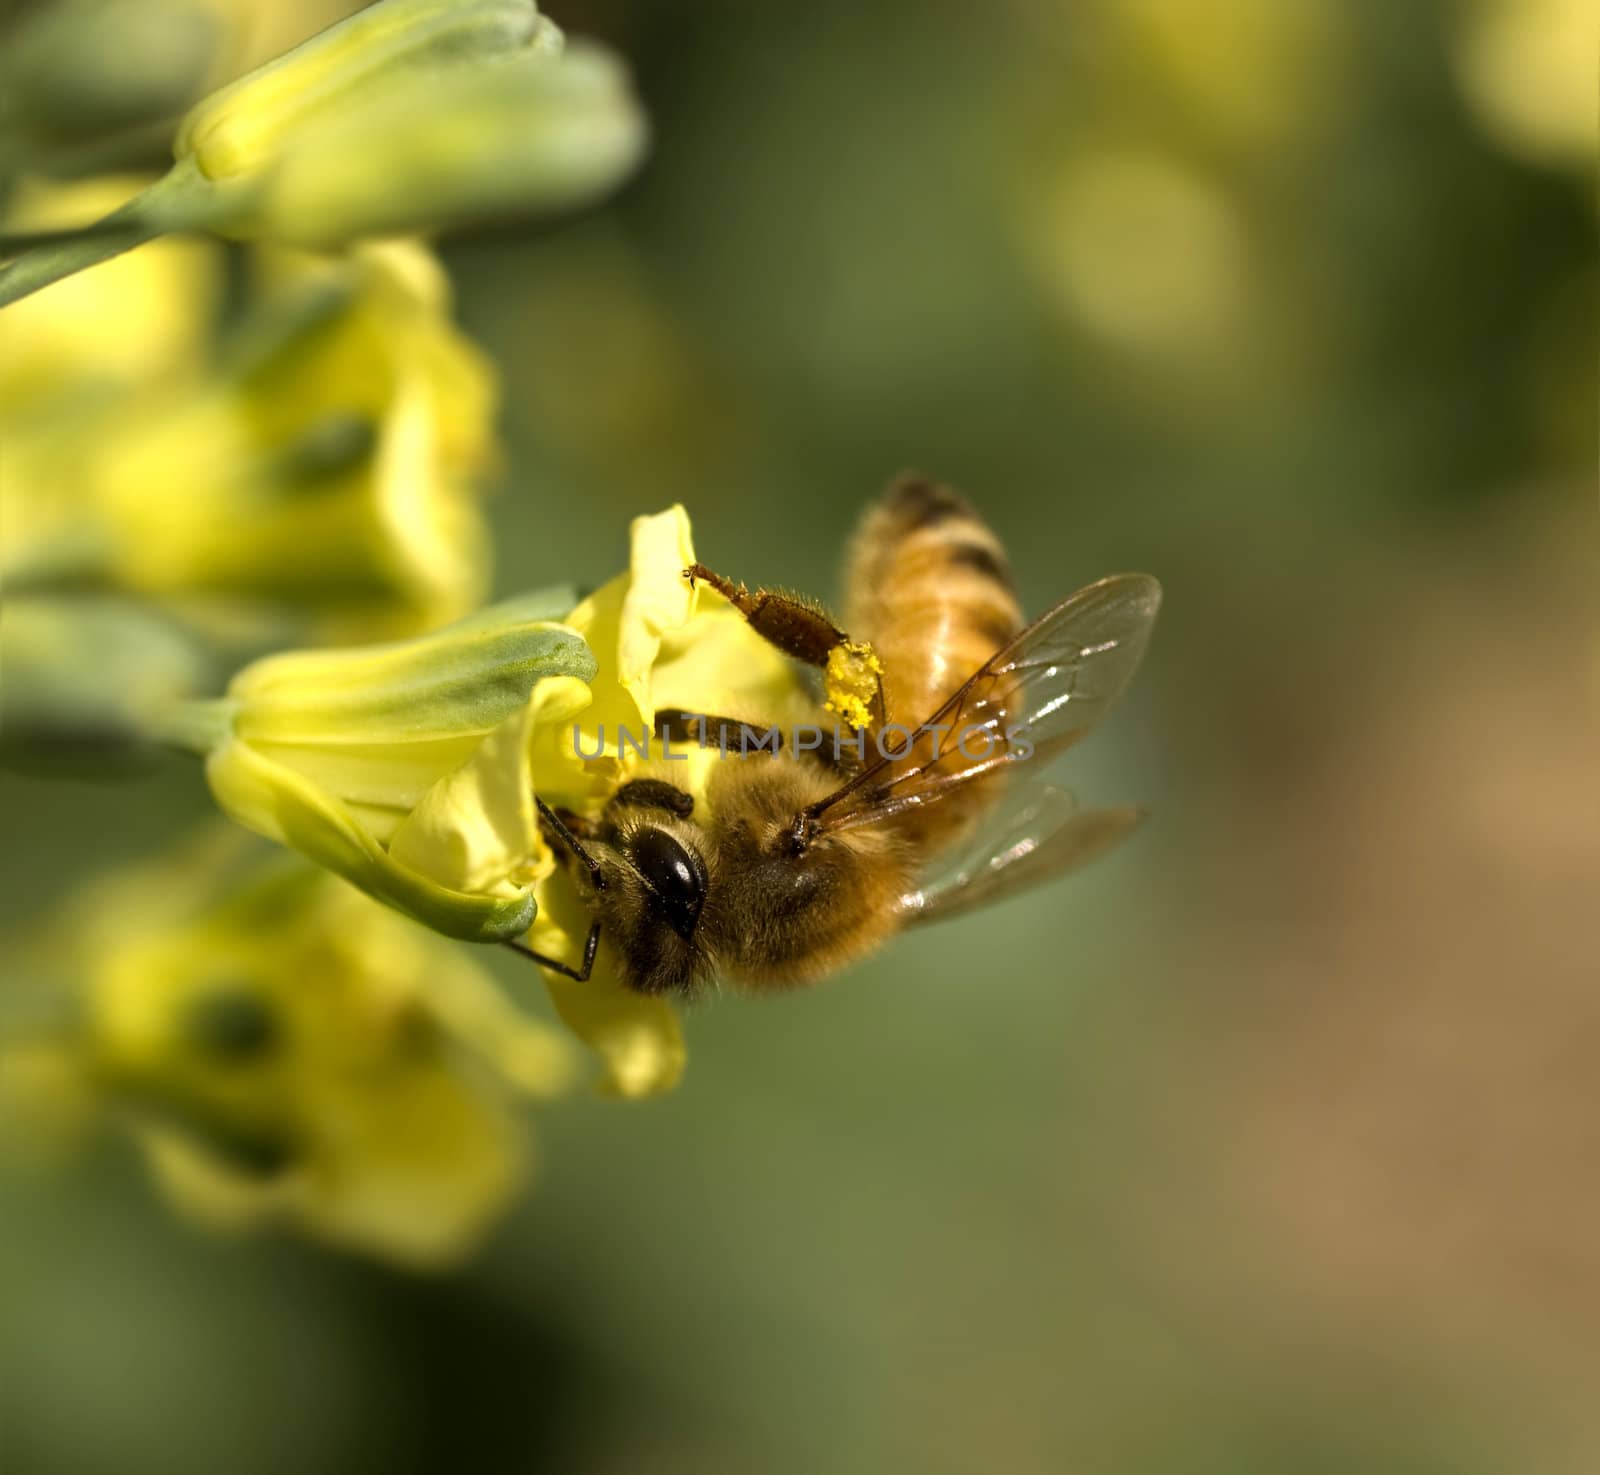  bee collecting pollen from yellow spring flower of broccoli  by sherj